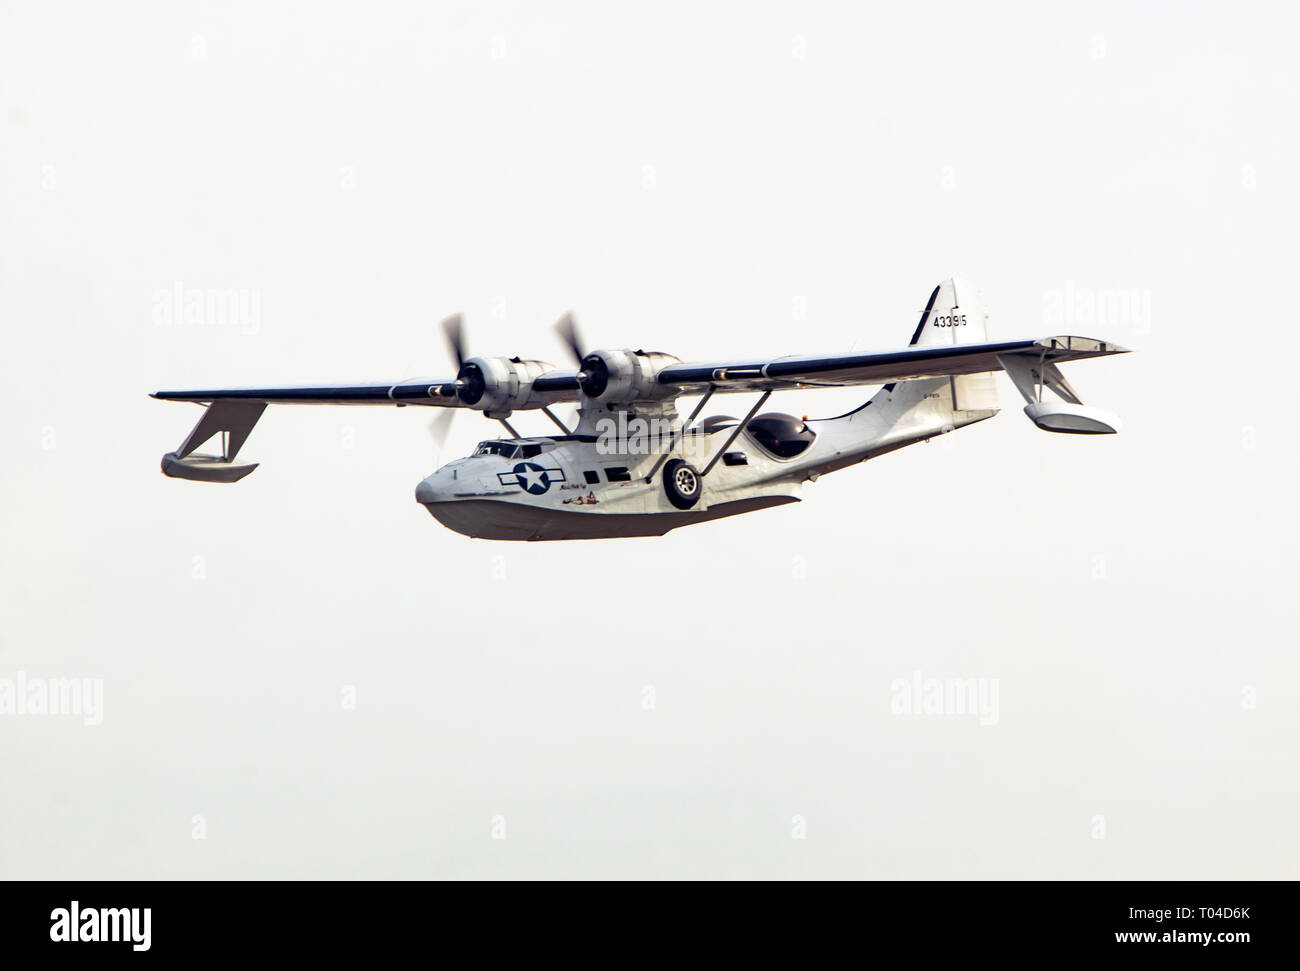 A Consolidated PBY-5A landing at Duxford airfield Stock Photo